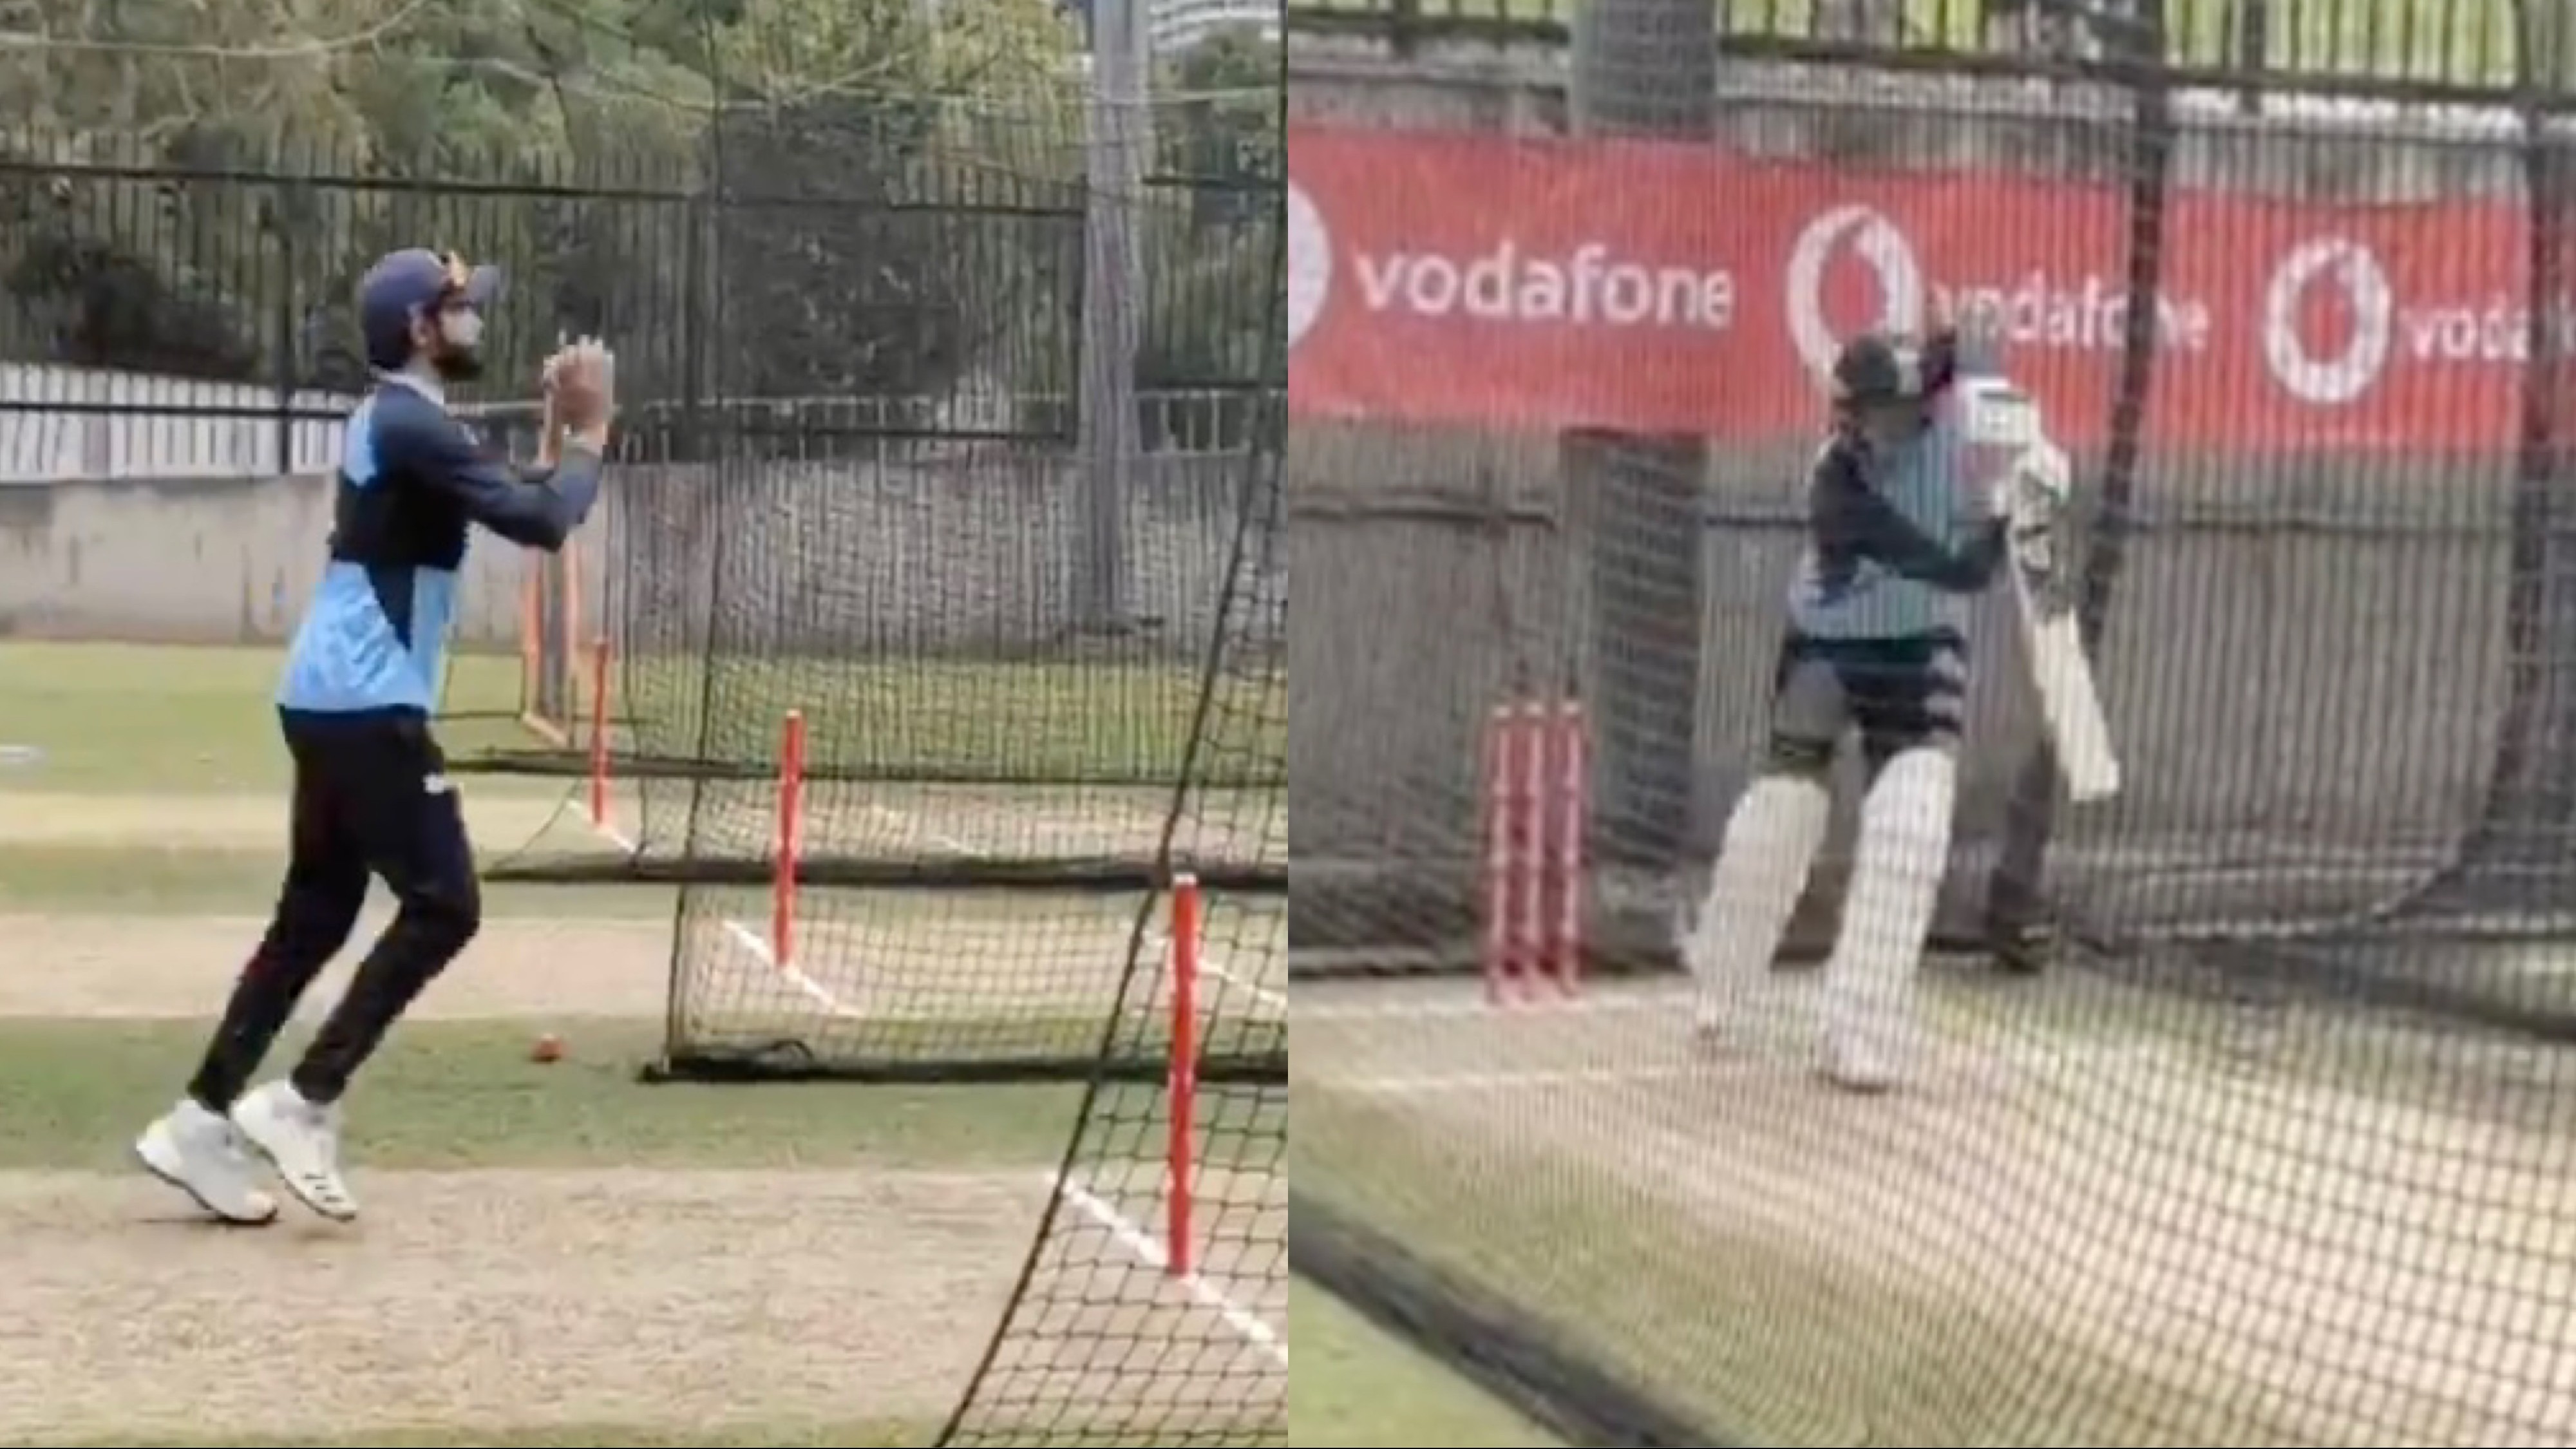 AUS v IND 2020-21: WATCH – Gill, Jadeja hone skills at nets as India begin preparation for Boxing Day Test